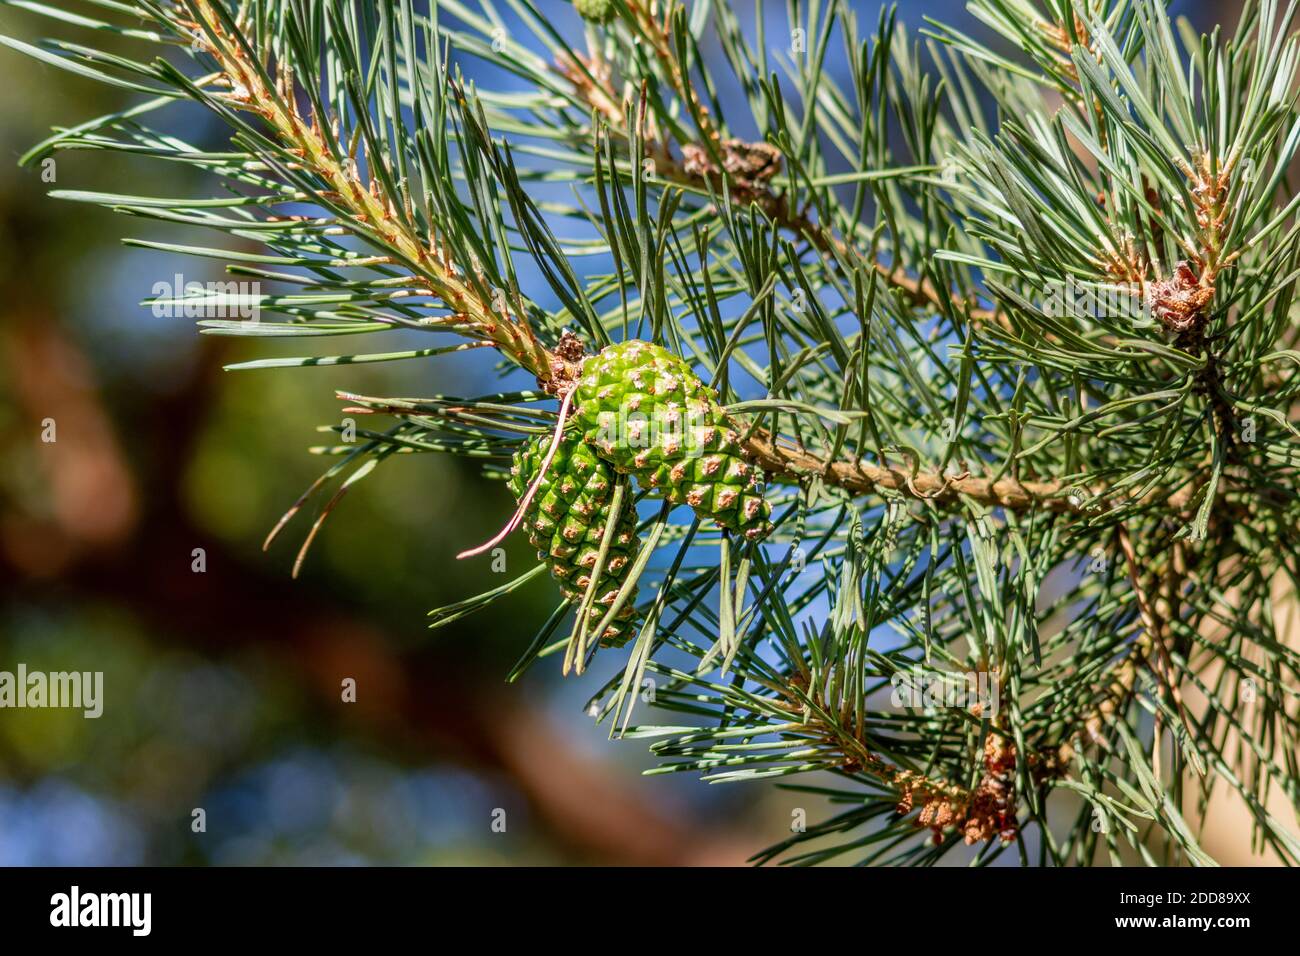 Young pine cones on a Scots or Scotch pine, Pinus sylvestris, tree Stock Photo